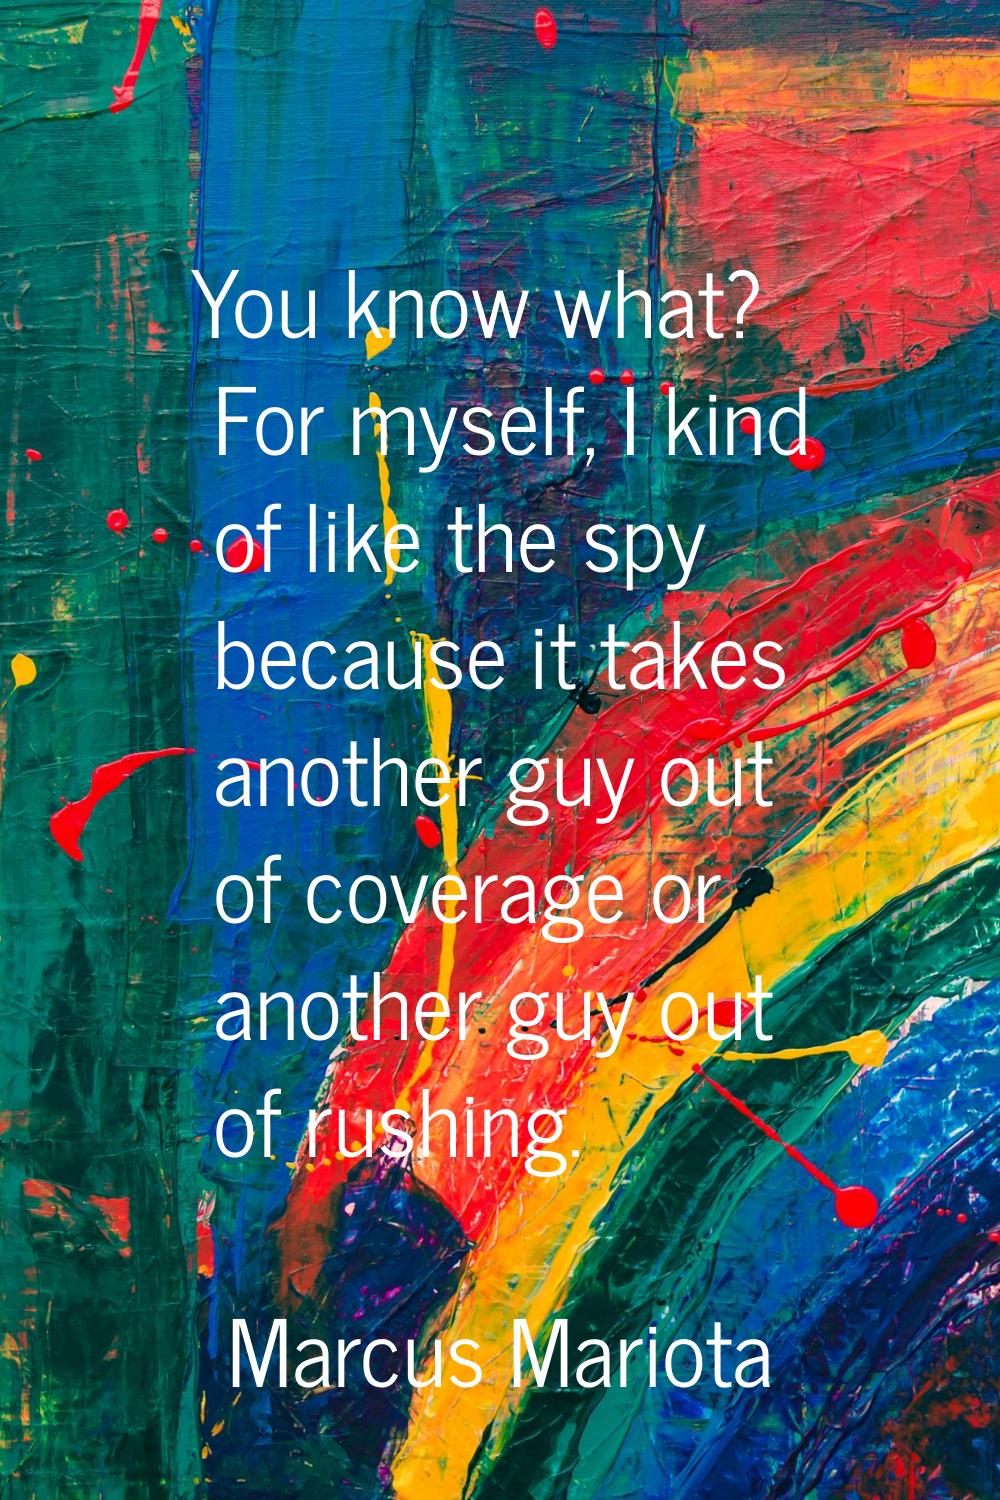 You know what? For myself, I kind of like the spy because it takes another guy out of coverage or a